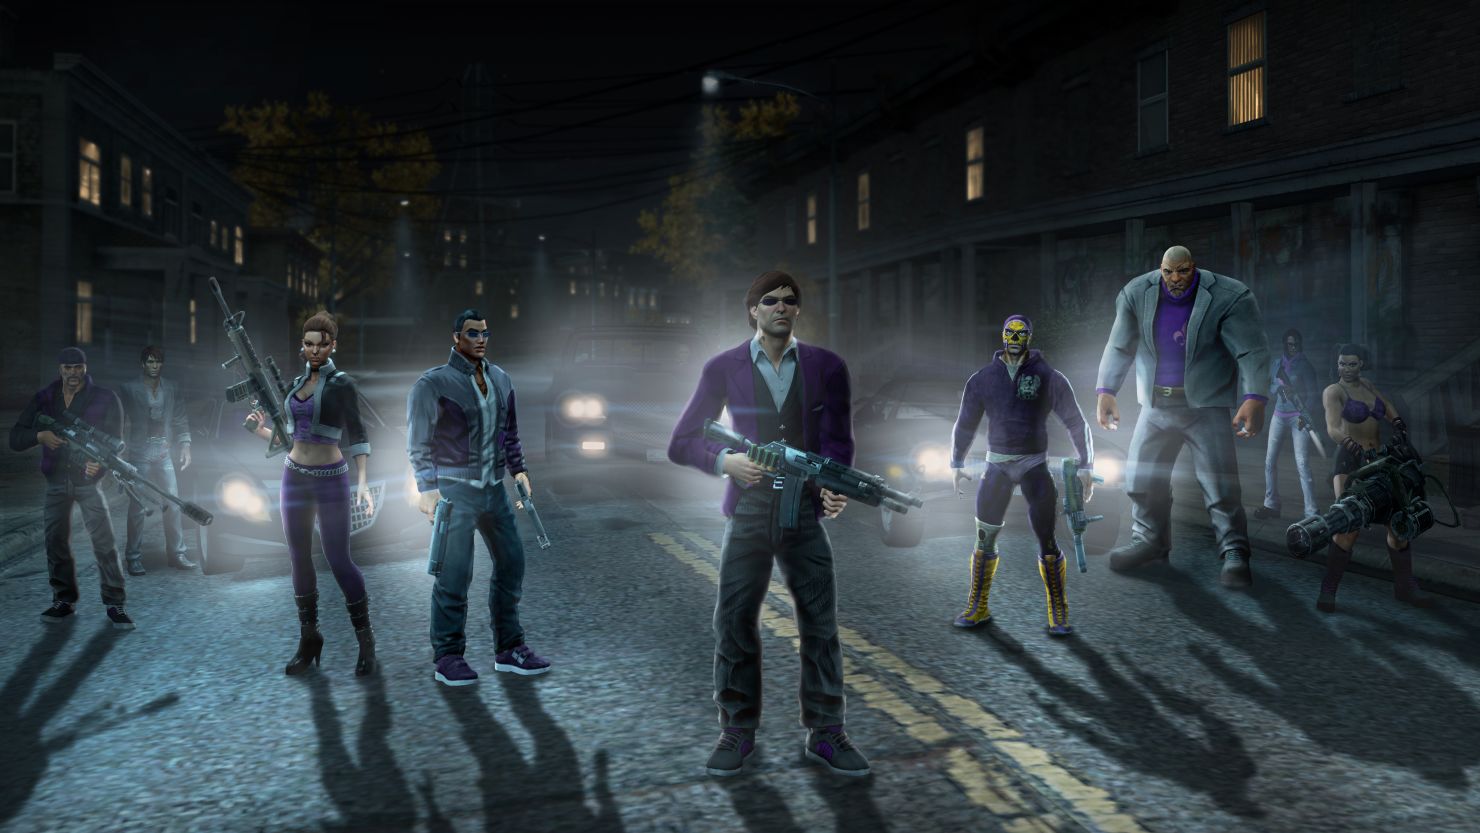 "Saints Row: The Third" is a shooter game with many weapons choices, from dual pistols to targeted air strikes.